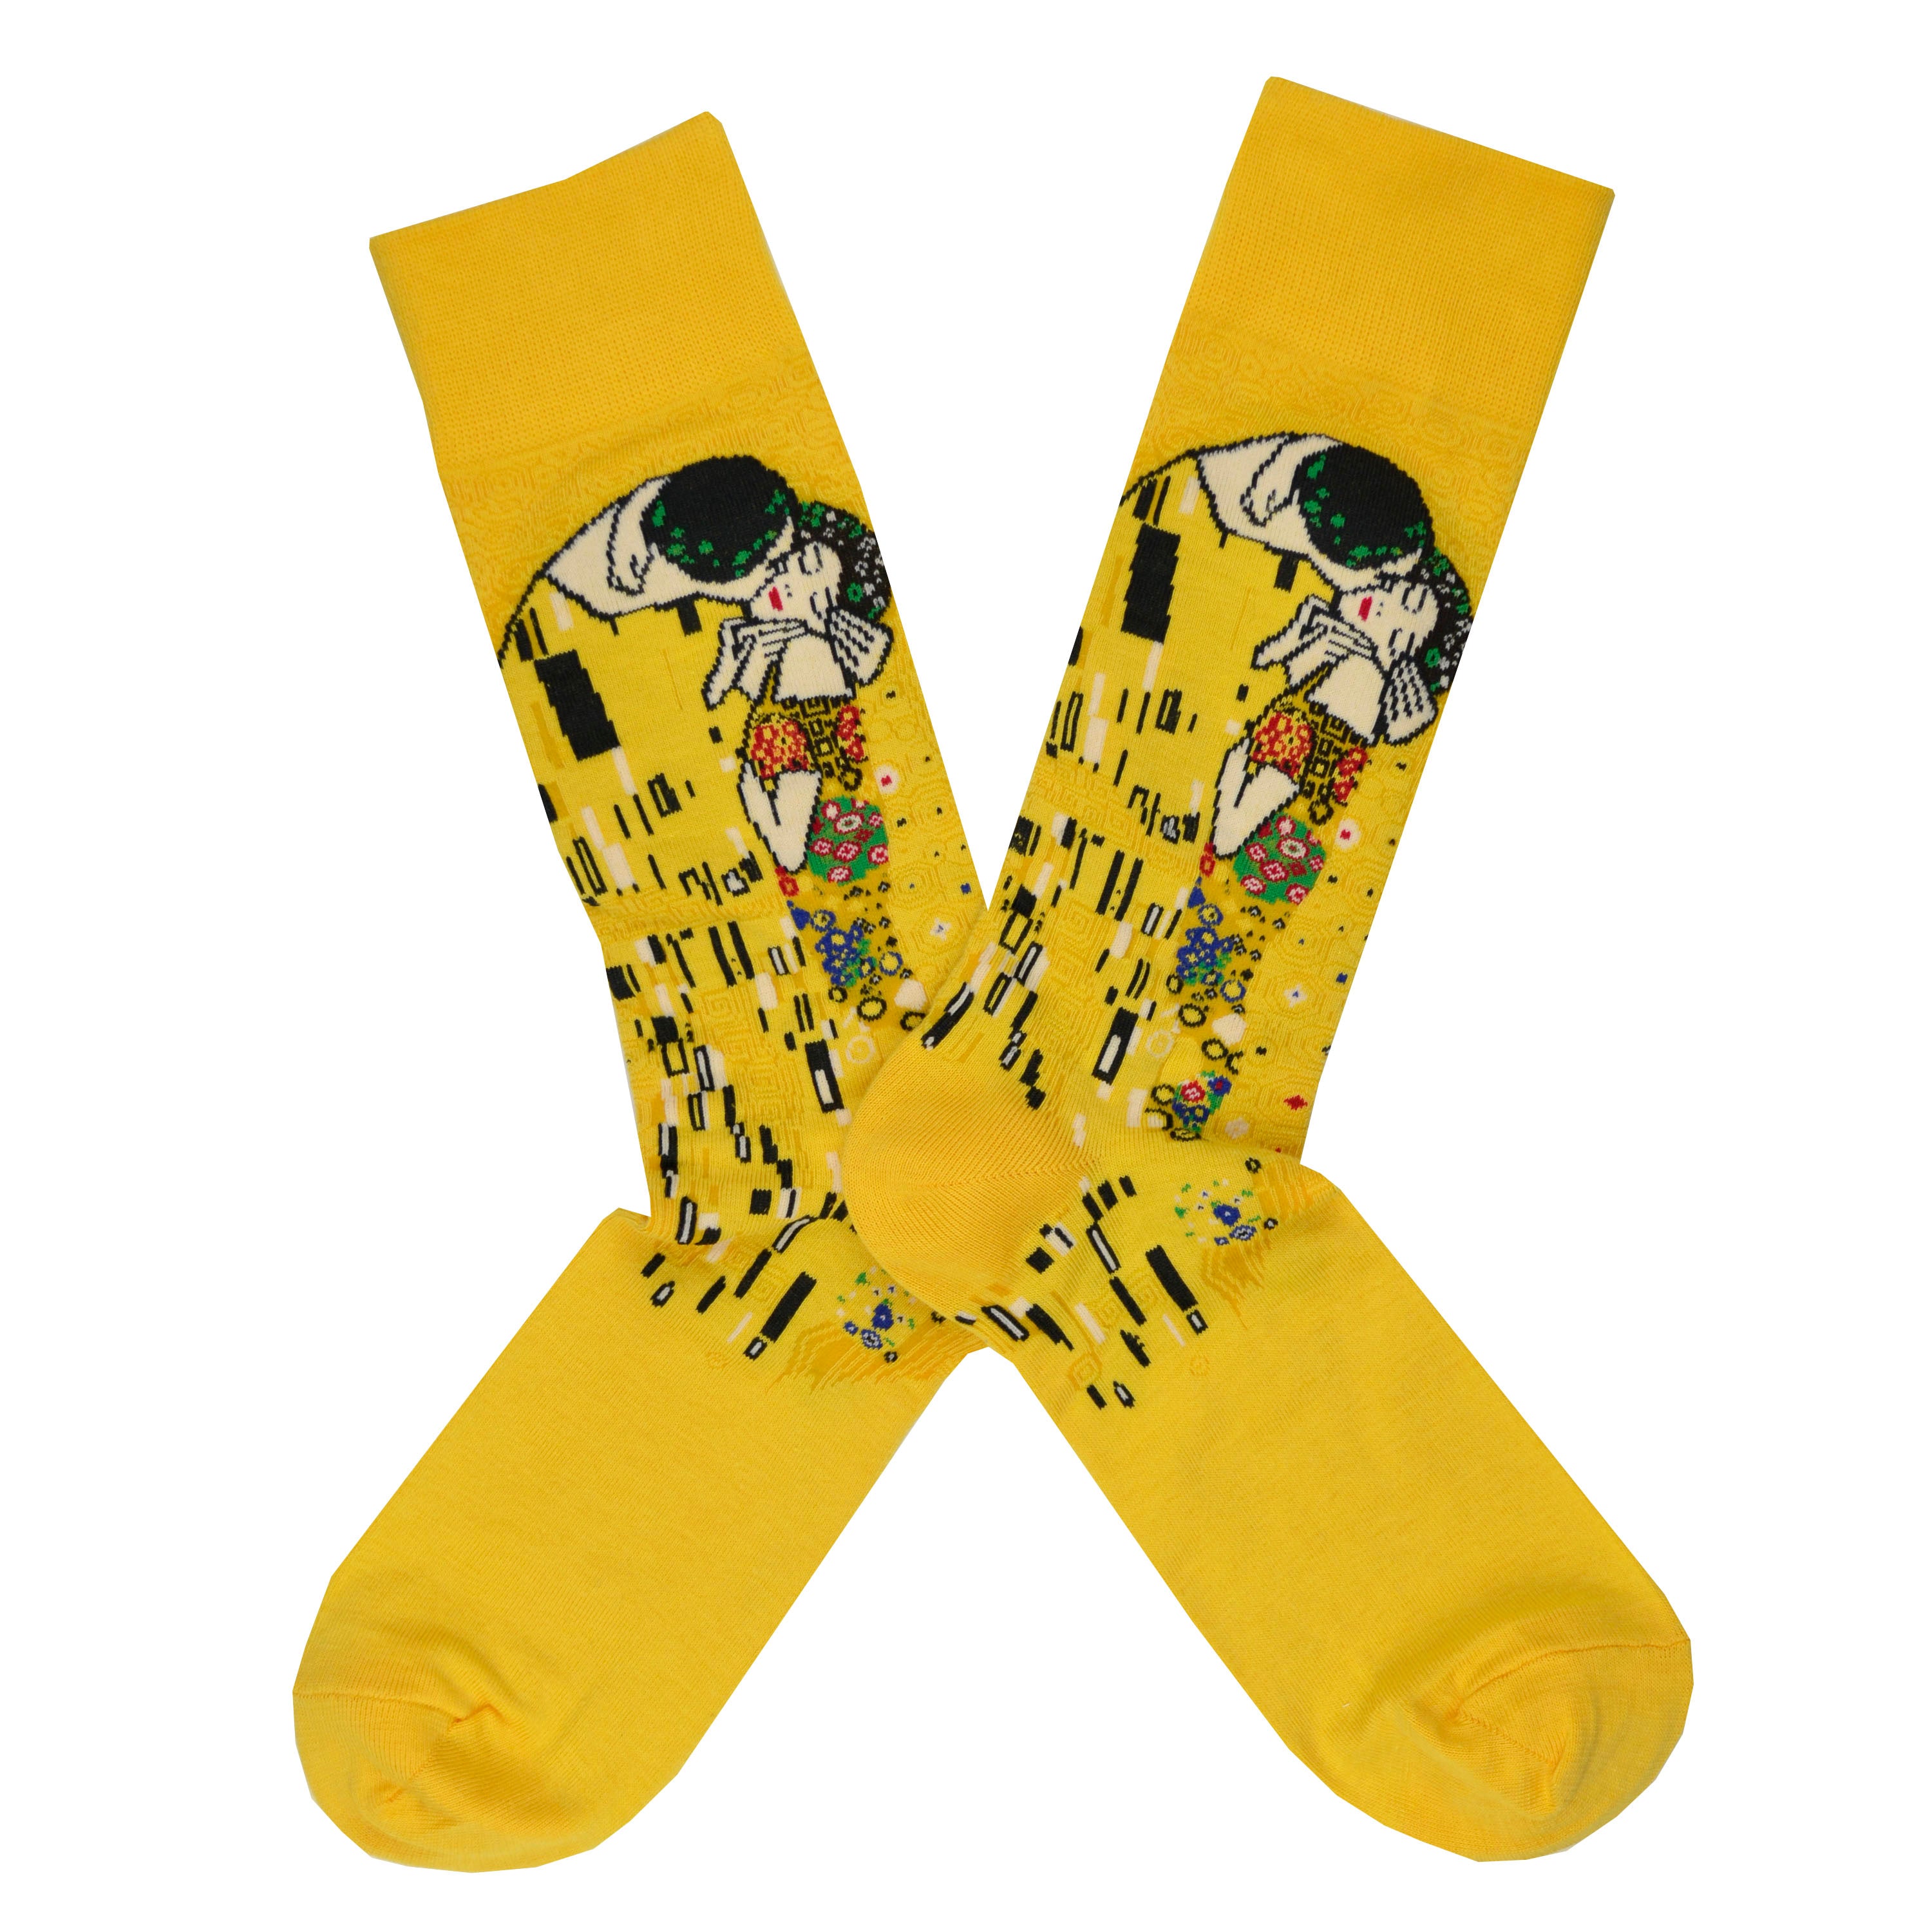 Shown in a flatlay, a pair of Hot Sox yellow cotton men’s crew socks with the artist Gustav Klimt’s abstract painting of embracing lovers